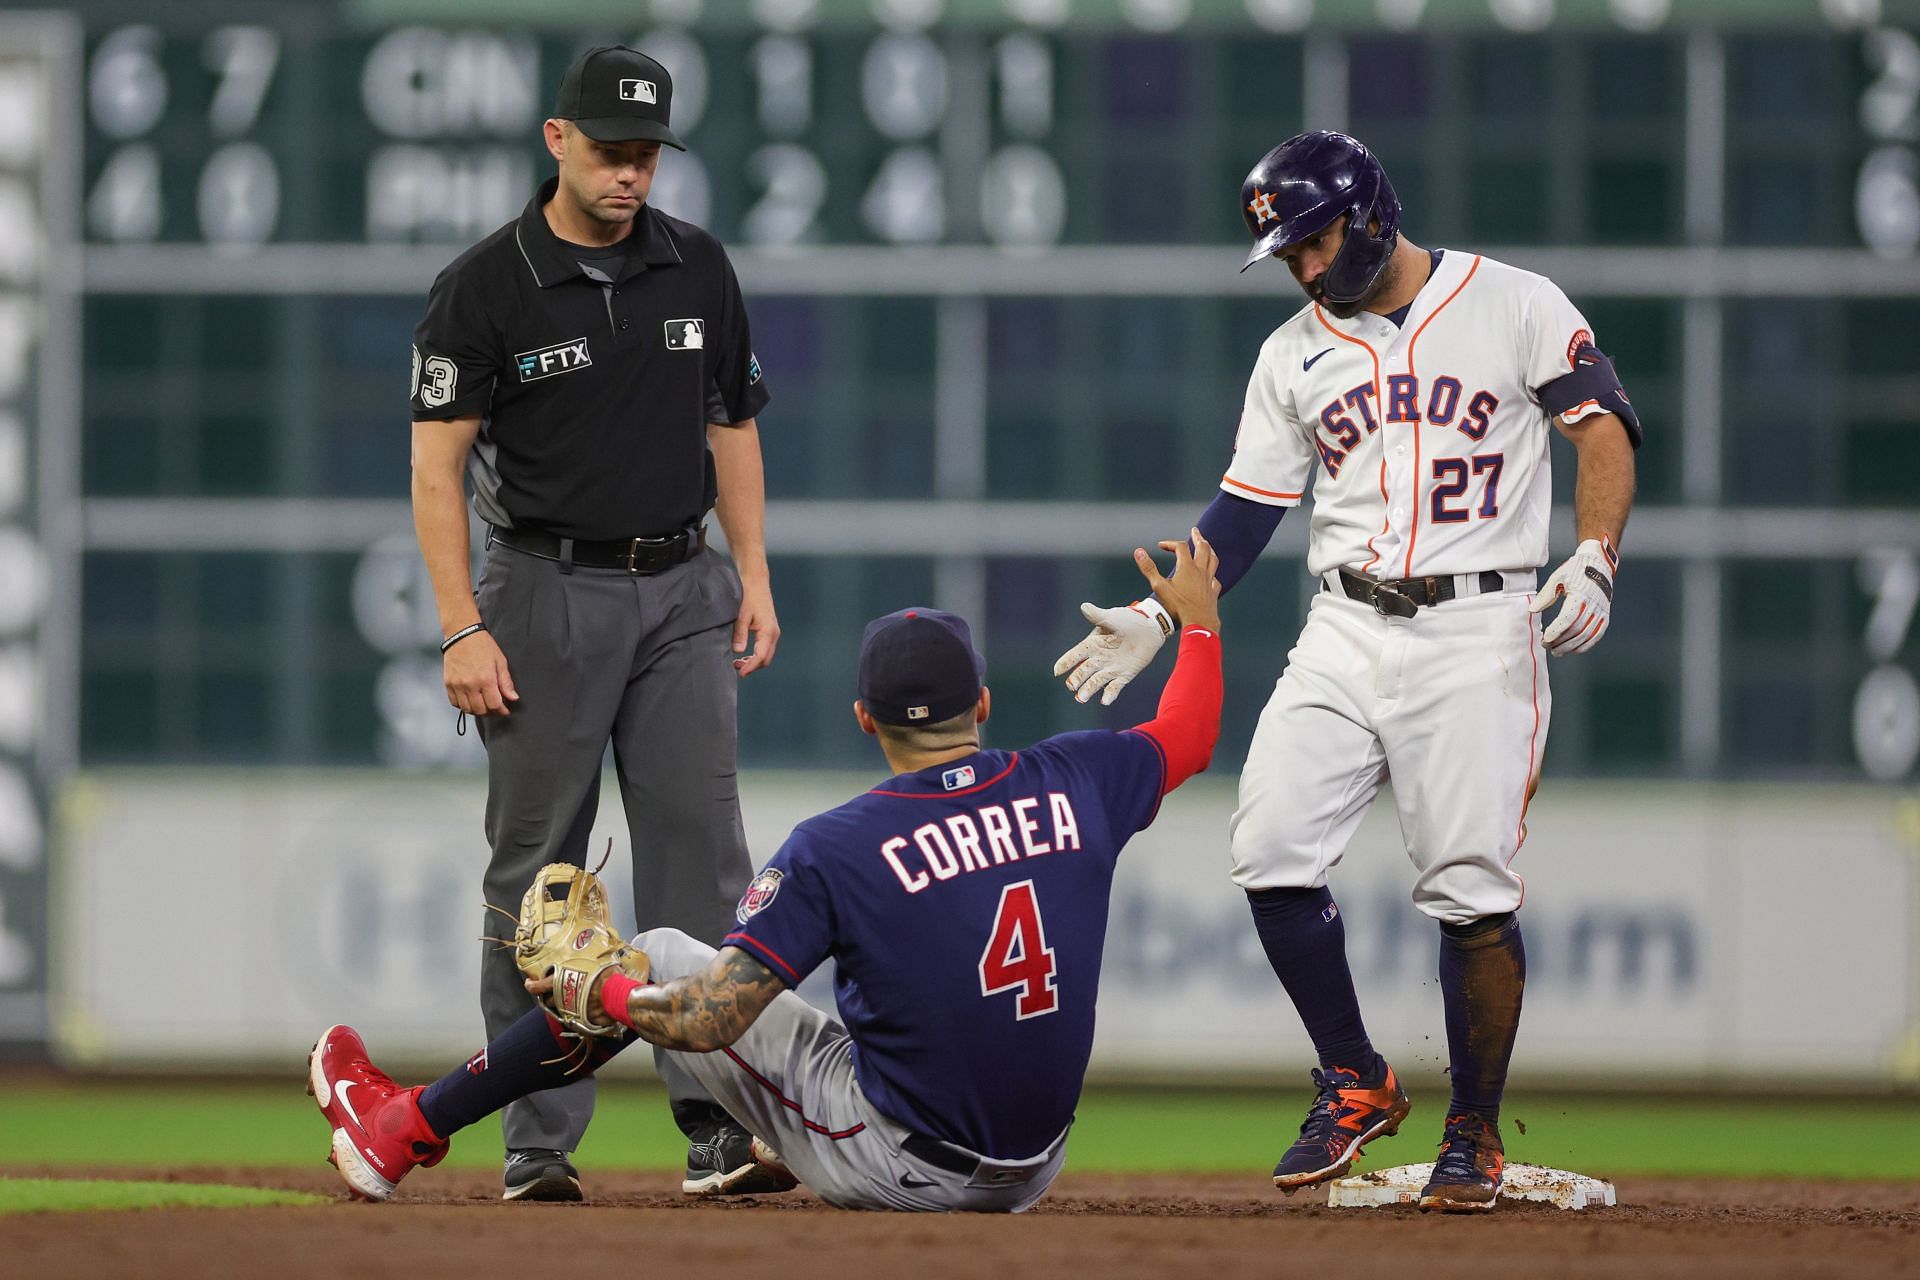 Carlos Correa's role in training Jeremy Peña to be his Astros